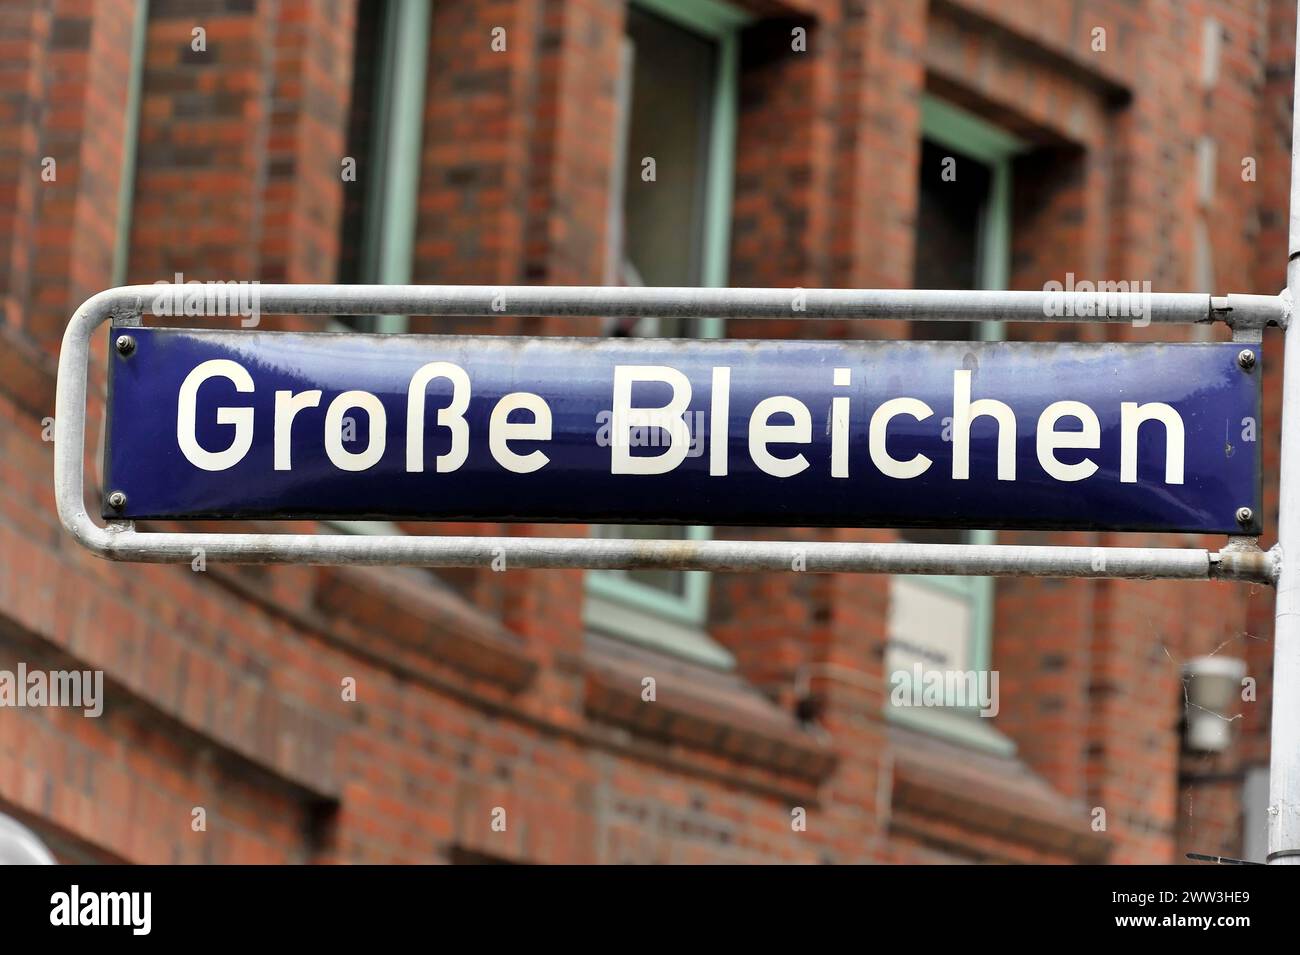 A street sign with the inscription 'Grosse Bleichen' on a cloudy day, Hamburg, Hanseatic City of Hamburg, Germany Stock Photo